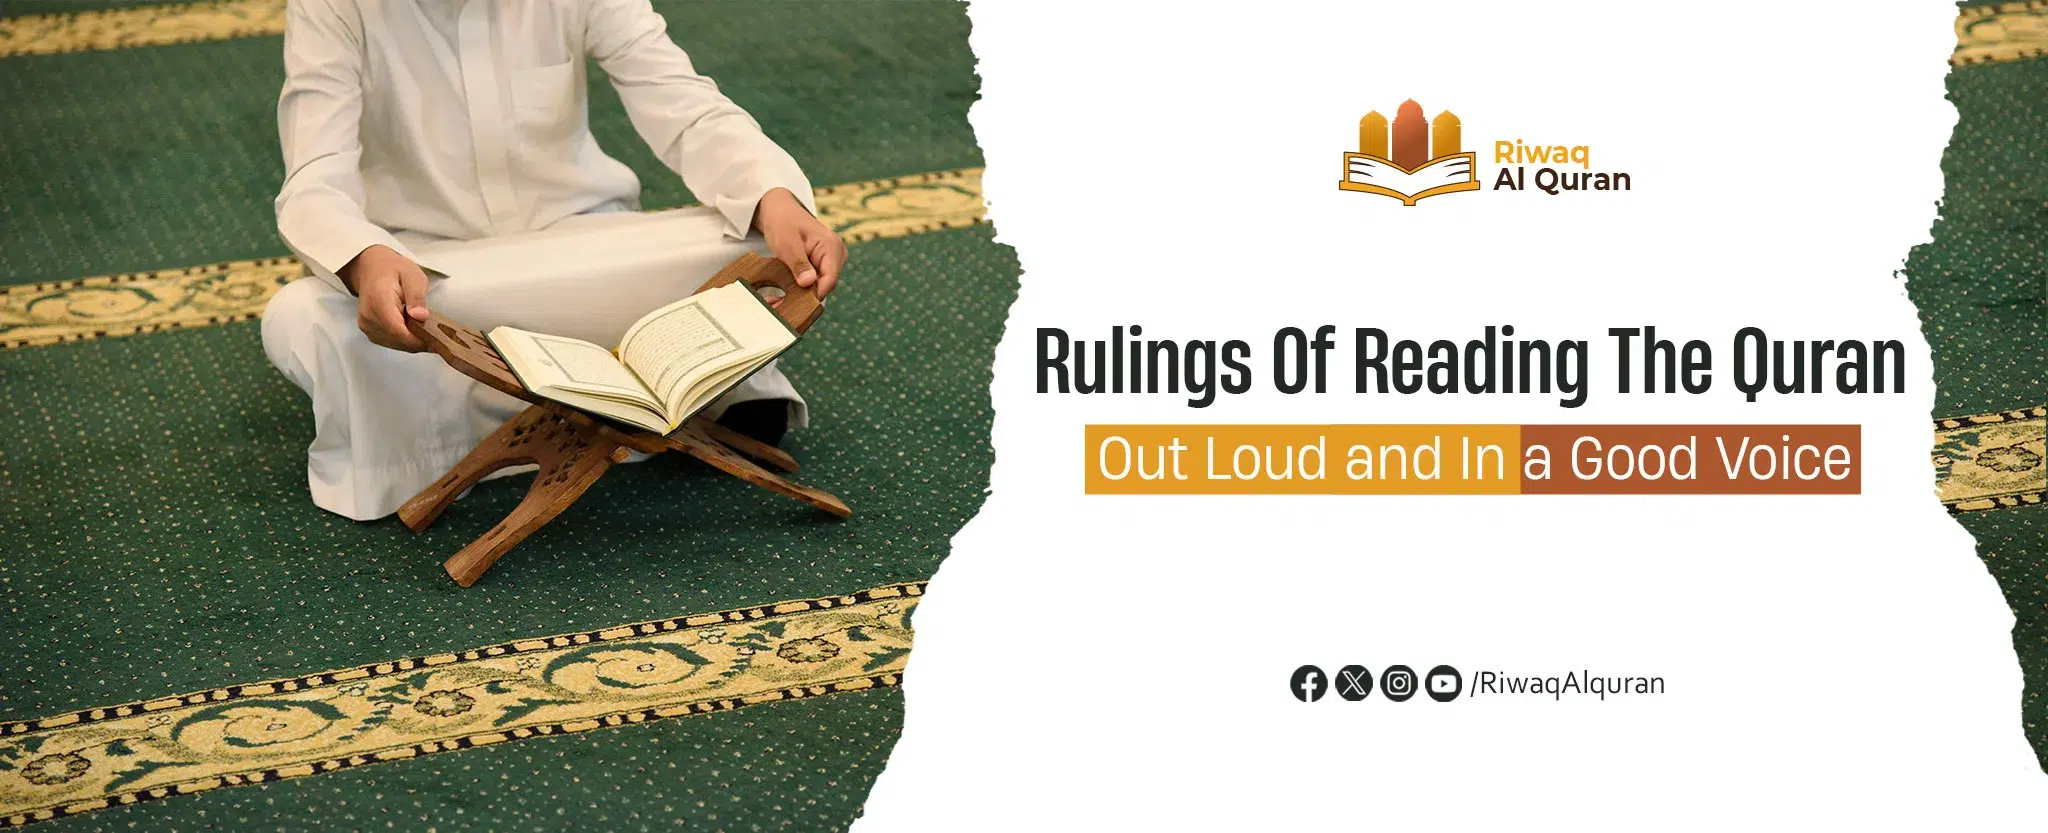 Rulings Of Reading The Quran Out Loud For Men And Women